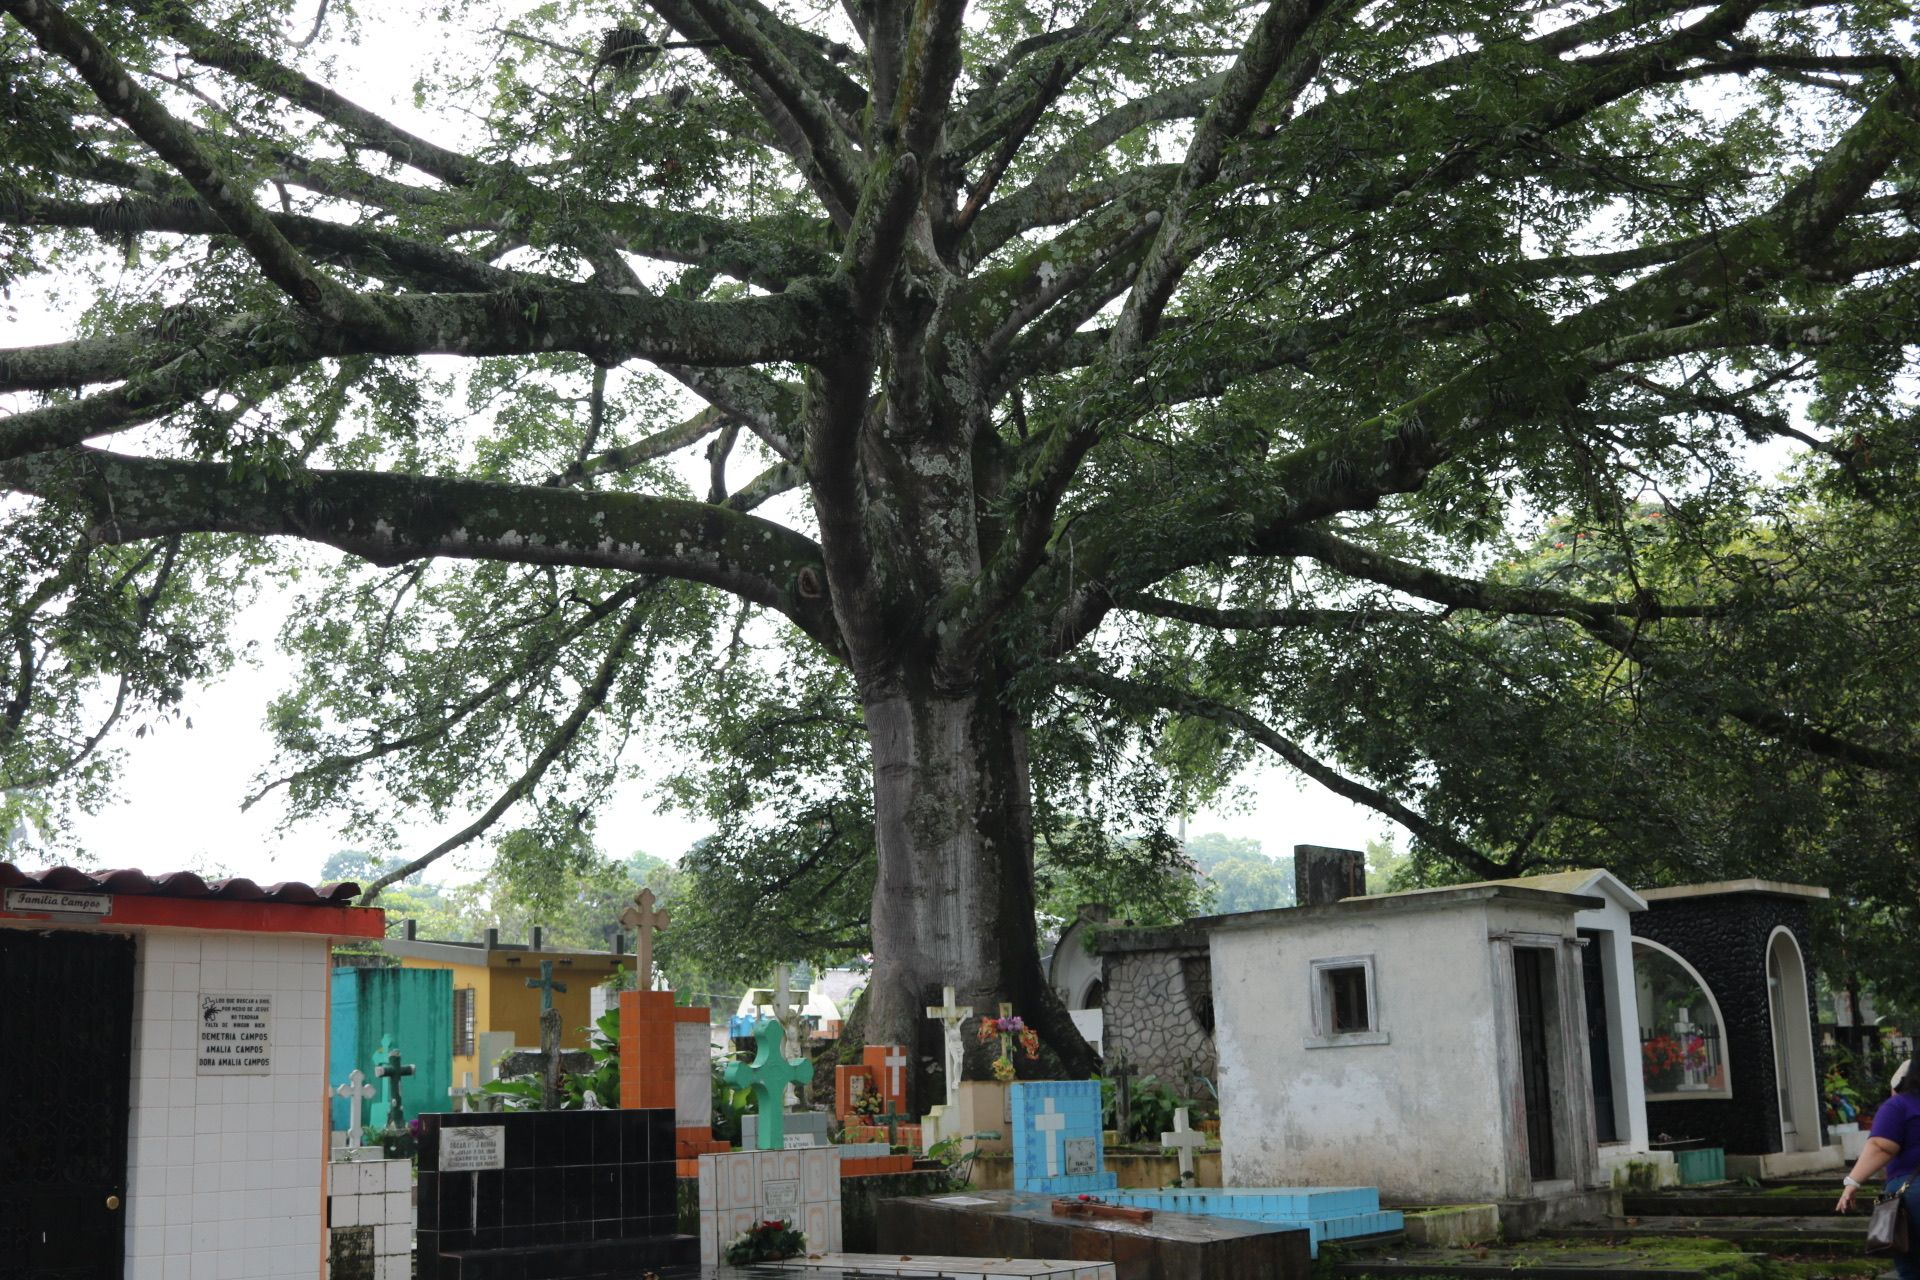 An enormous tree extends over the grave stones and mausoleums at the Cementerio Municipal Santa Tecla. Image by Lauryn Claassen. El Salvador, 2017.